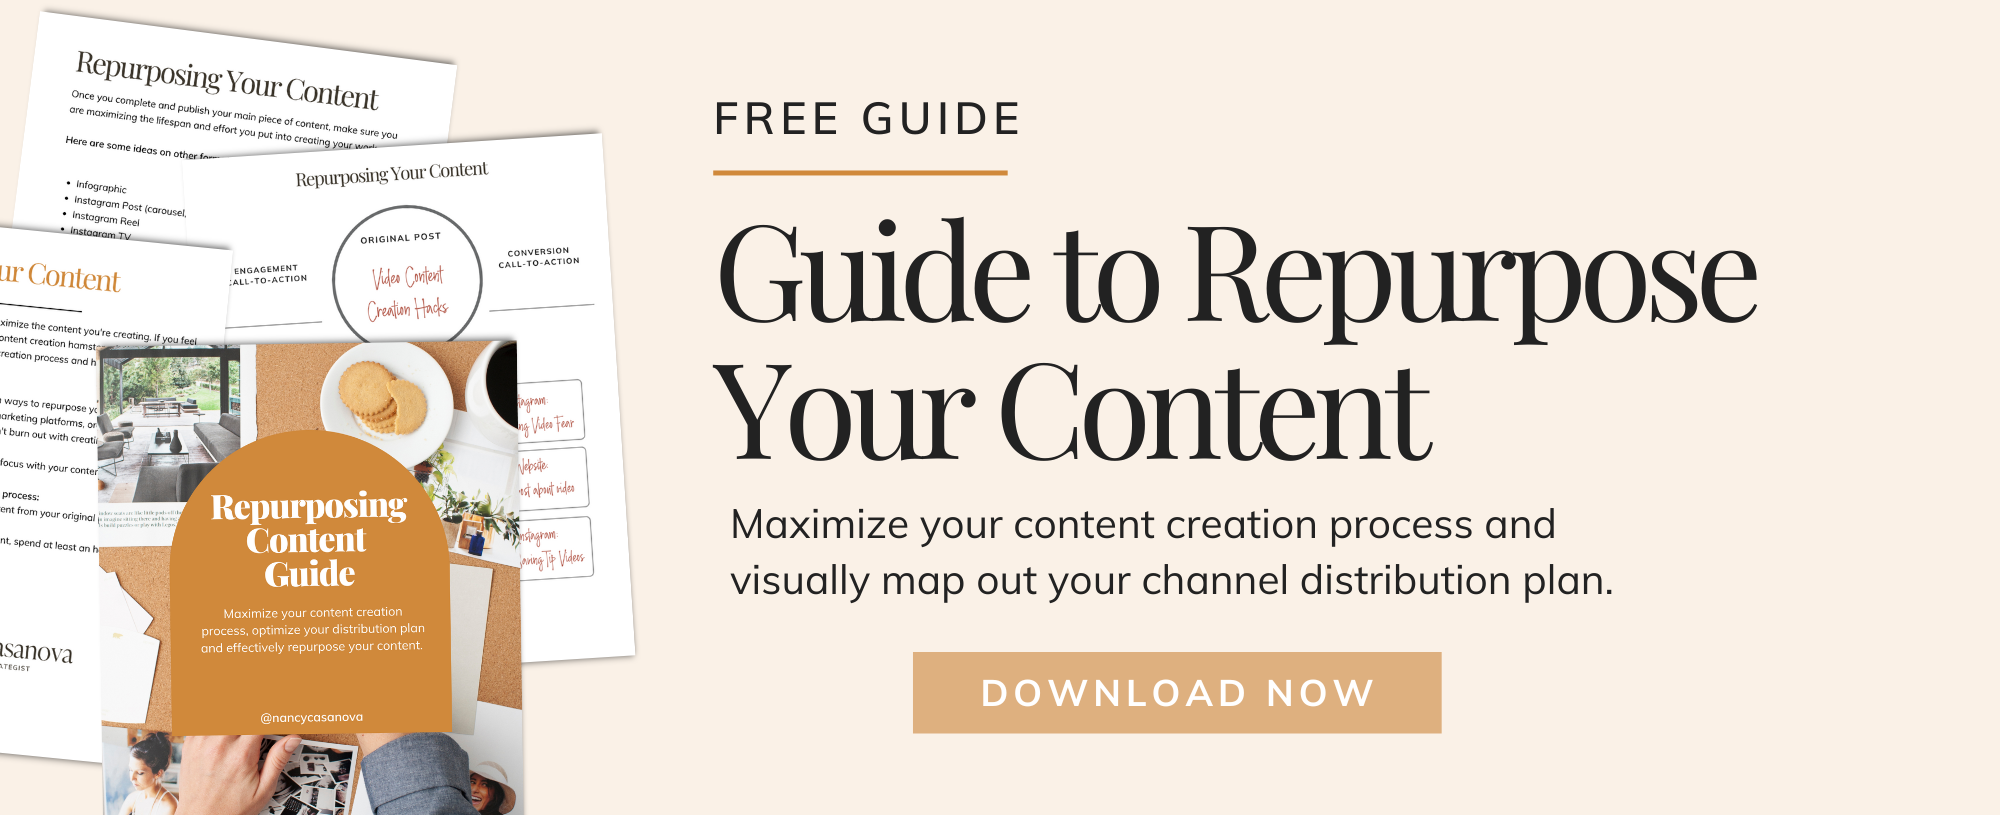 If you need help maximizing and repurposing your content, check out this content repurposing guide. Download this Content Repurposing Guide to present your content in a new format and expand its lifespan and reach. 